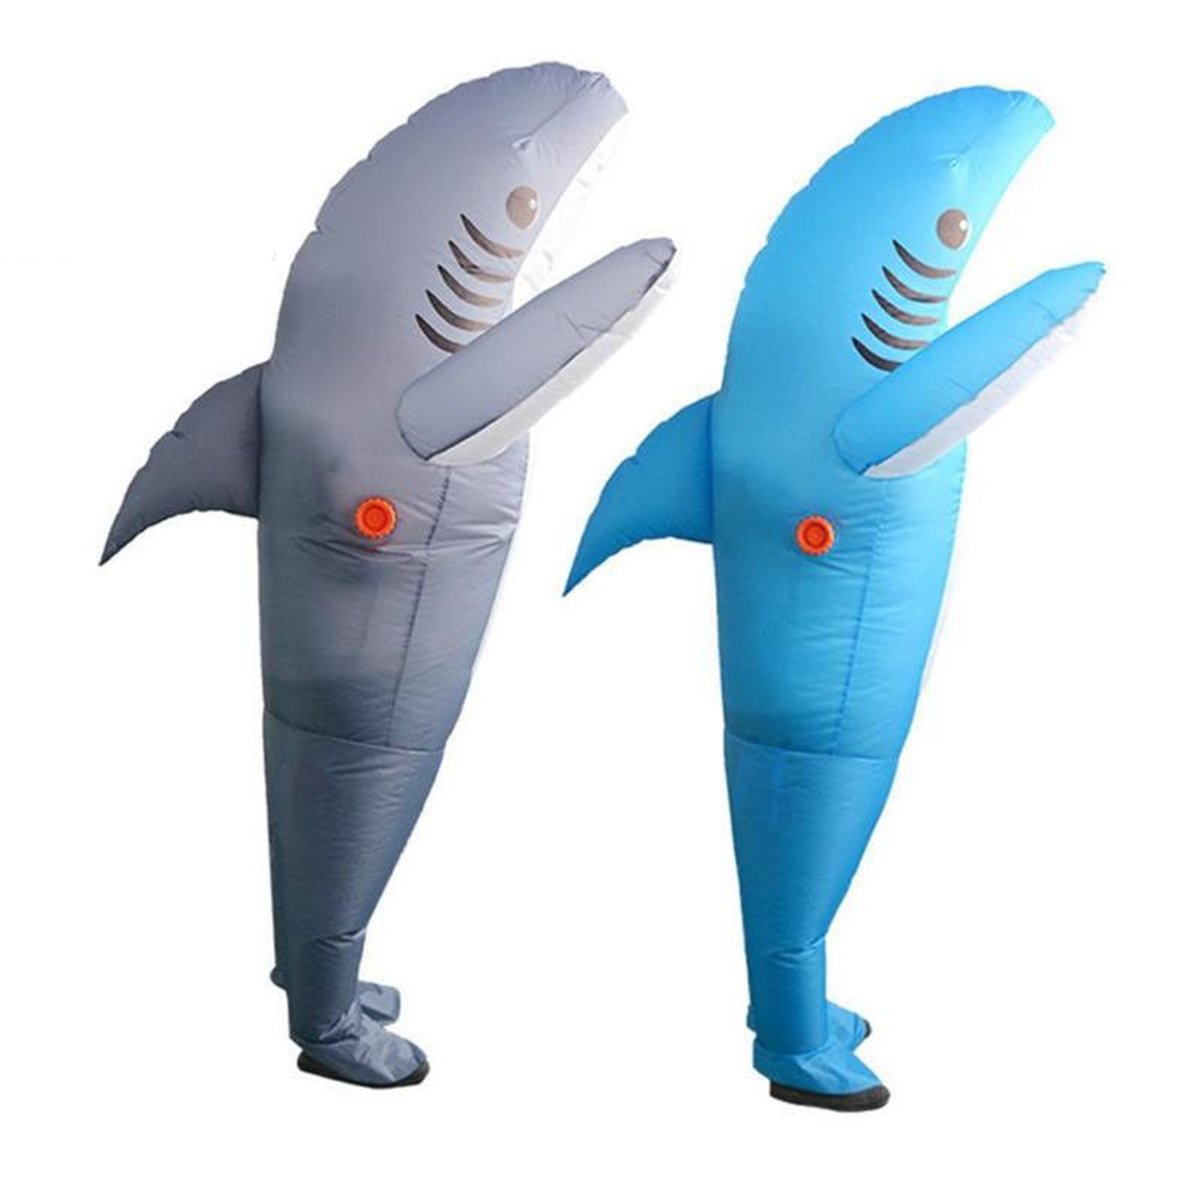 Inflatable Costumes Shark Adult Halloween Fancy Dress Funny Scary Dress Costume 2